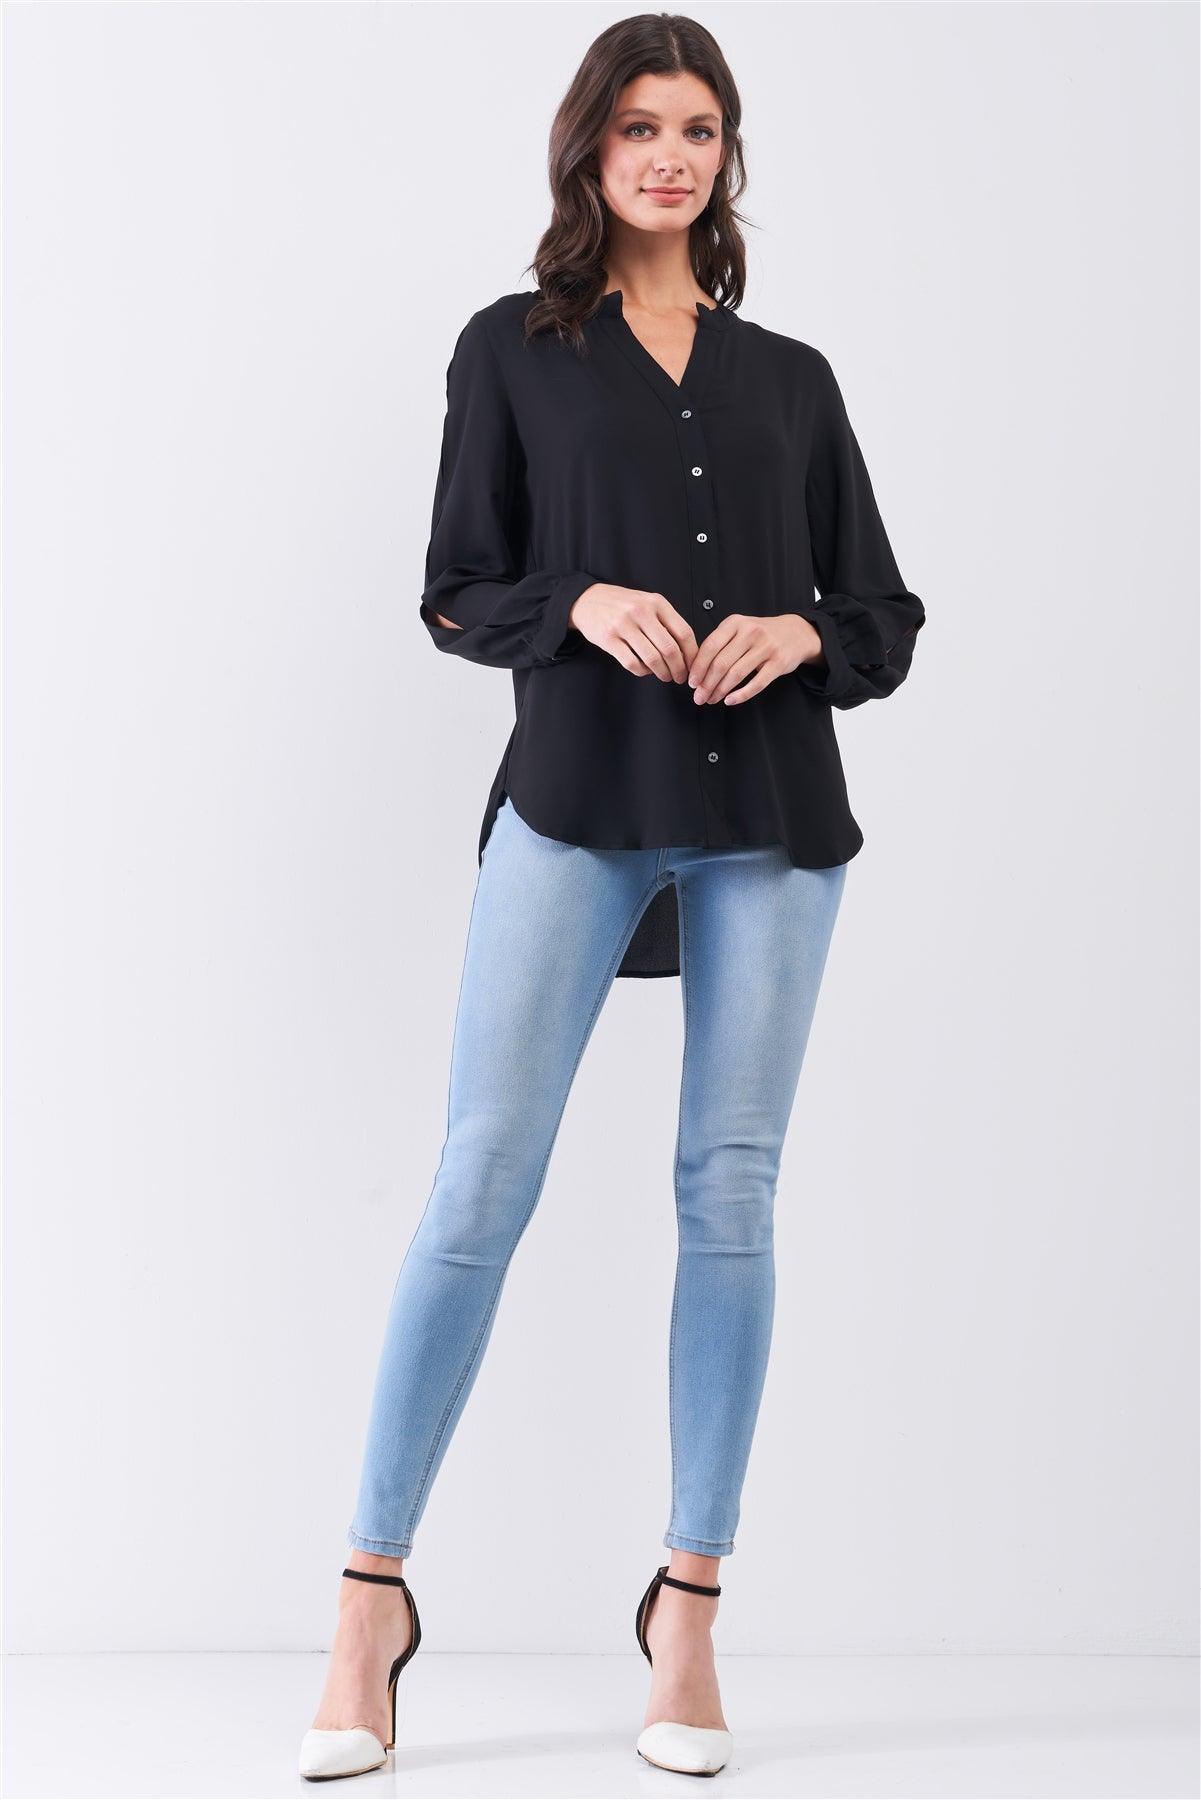 Black Asymmetrical Long Sleeve Button-Up Front Relaxed Shirt